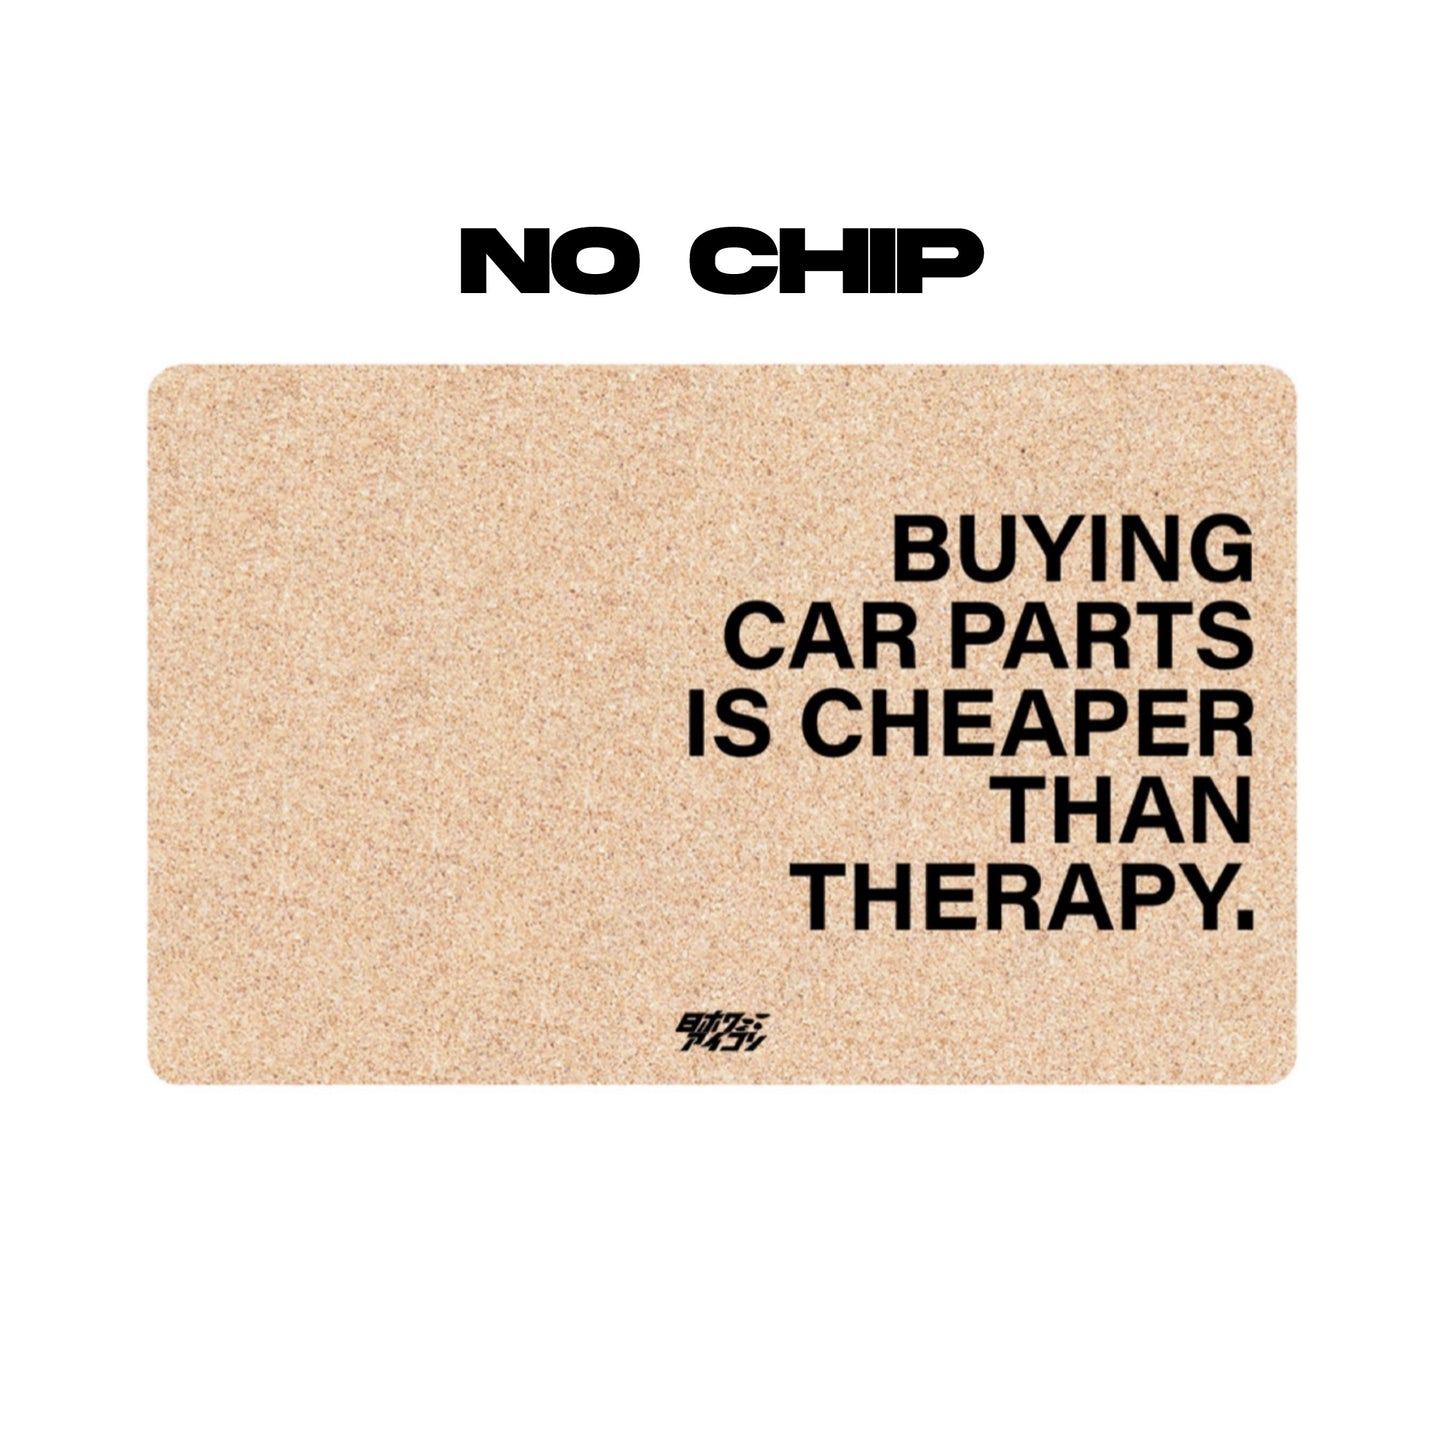 Buying Car Parts Is Cheaper Than Therapy. | Bank Card Decal